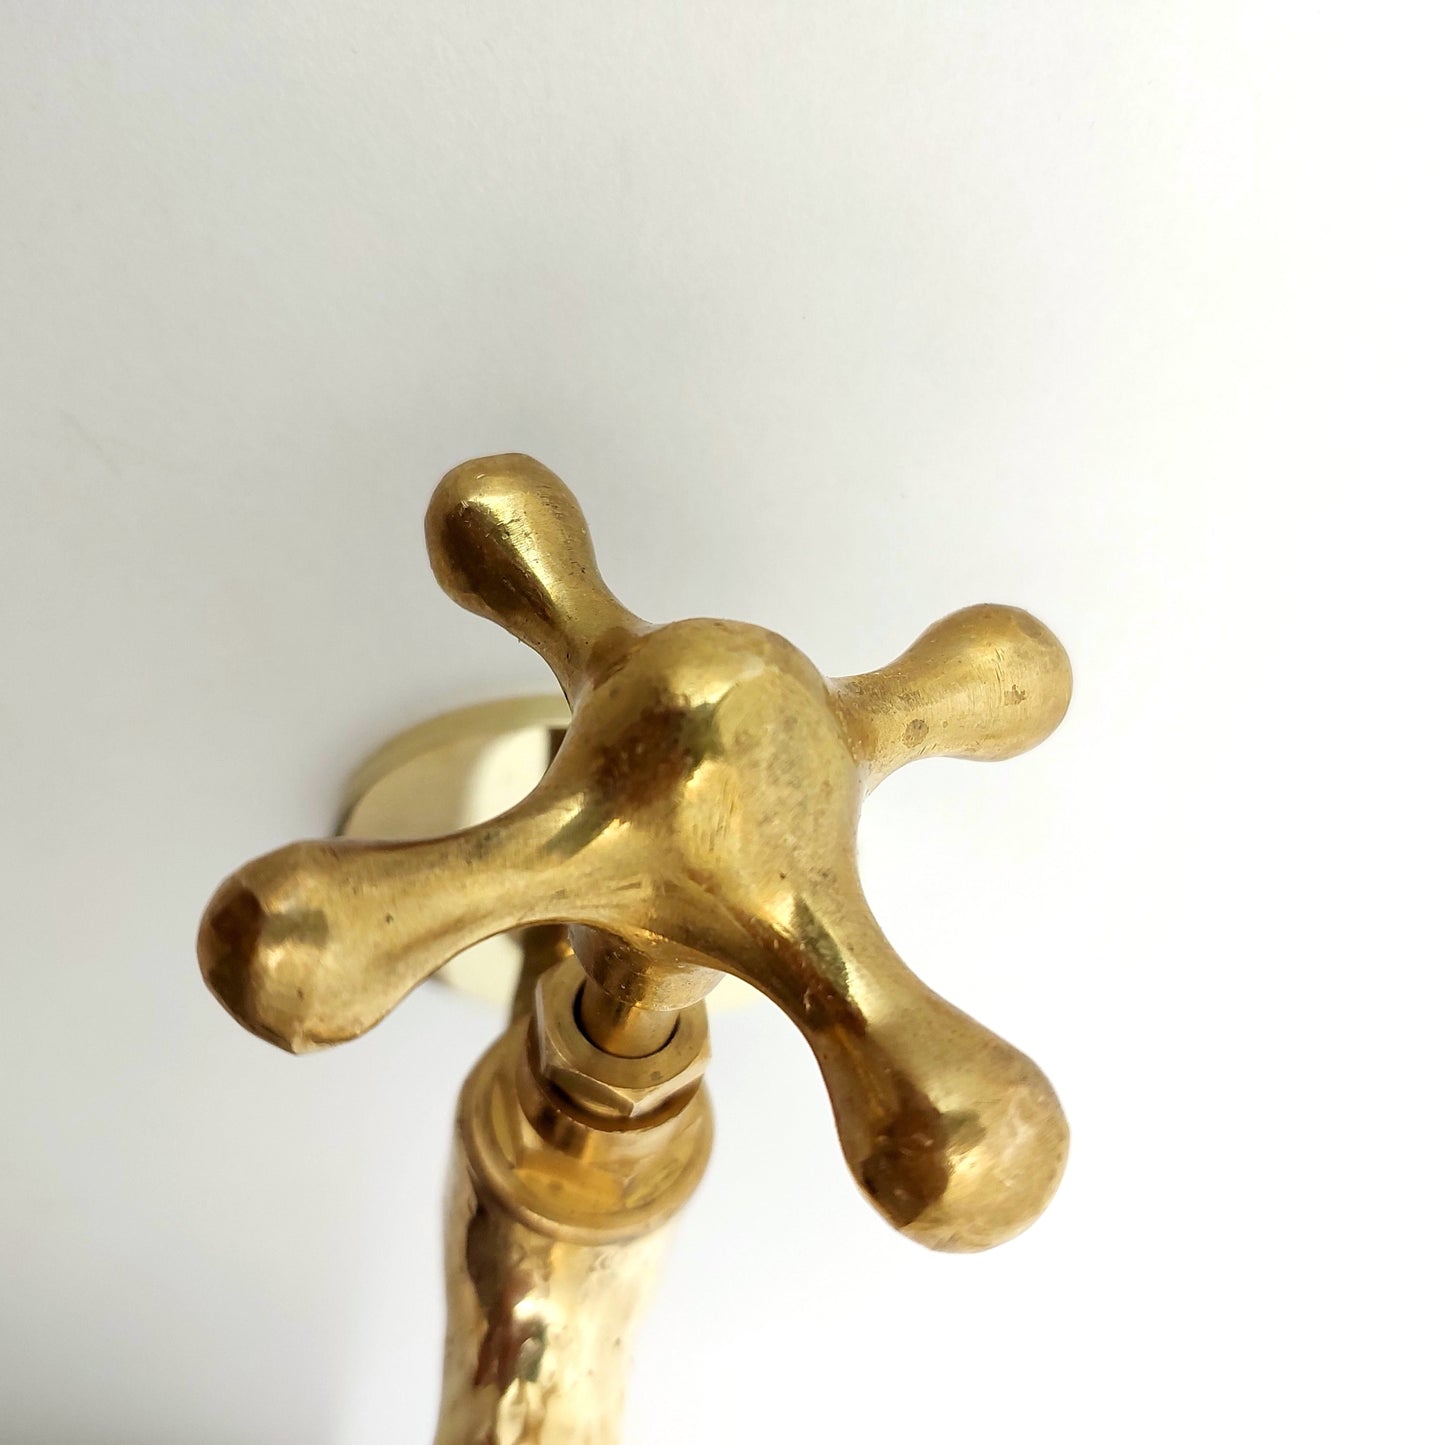 Unlacquered Solid Brass Wall Mounted Faucet with Cross Handle - Ref: AWF001